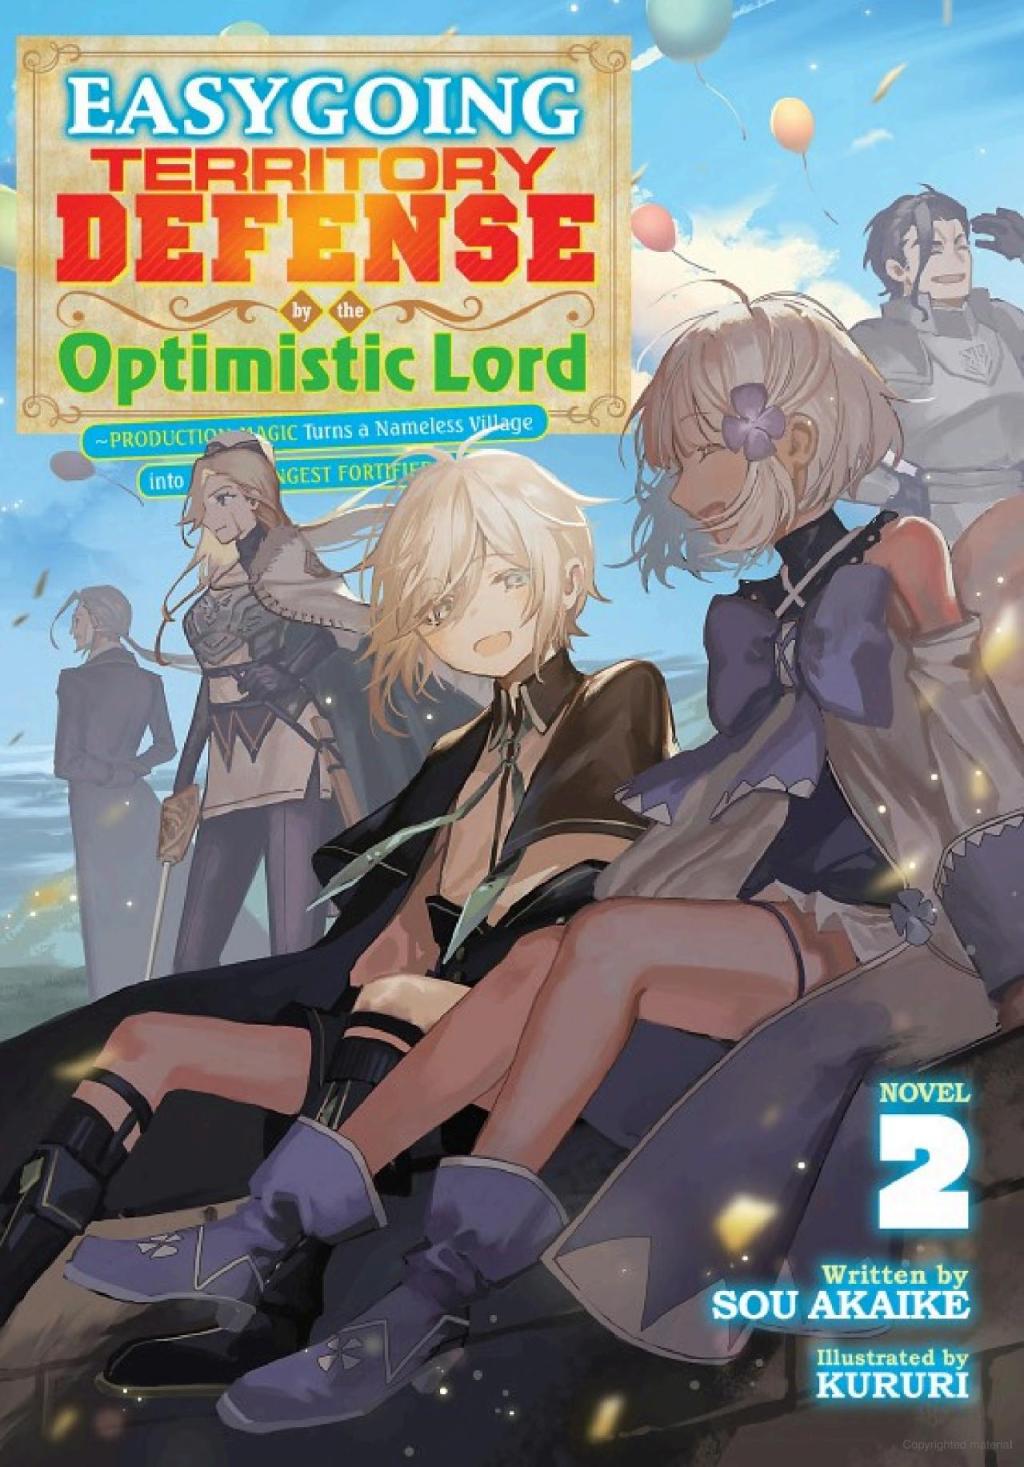 Easygoing Territory Defense by the Optimistic Lord Vol. 2 Review